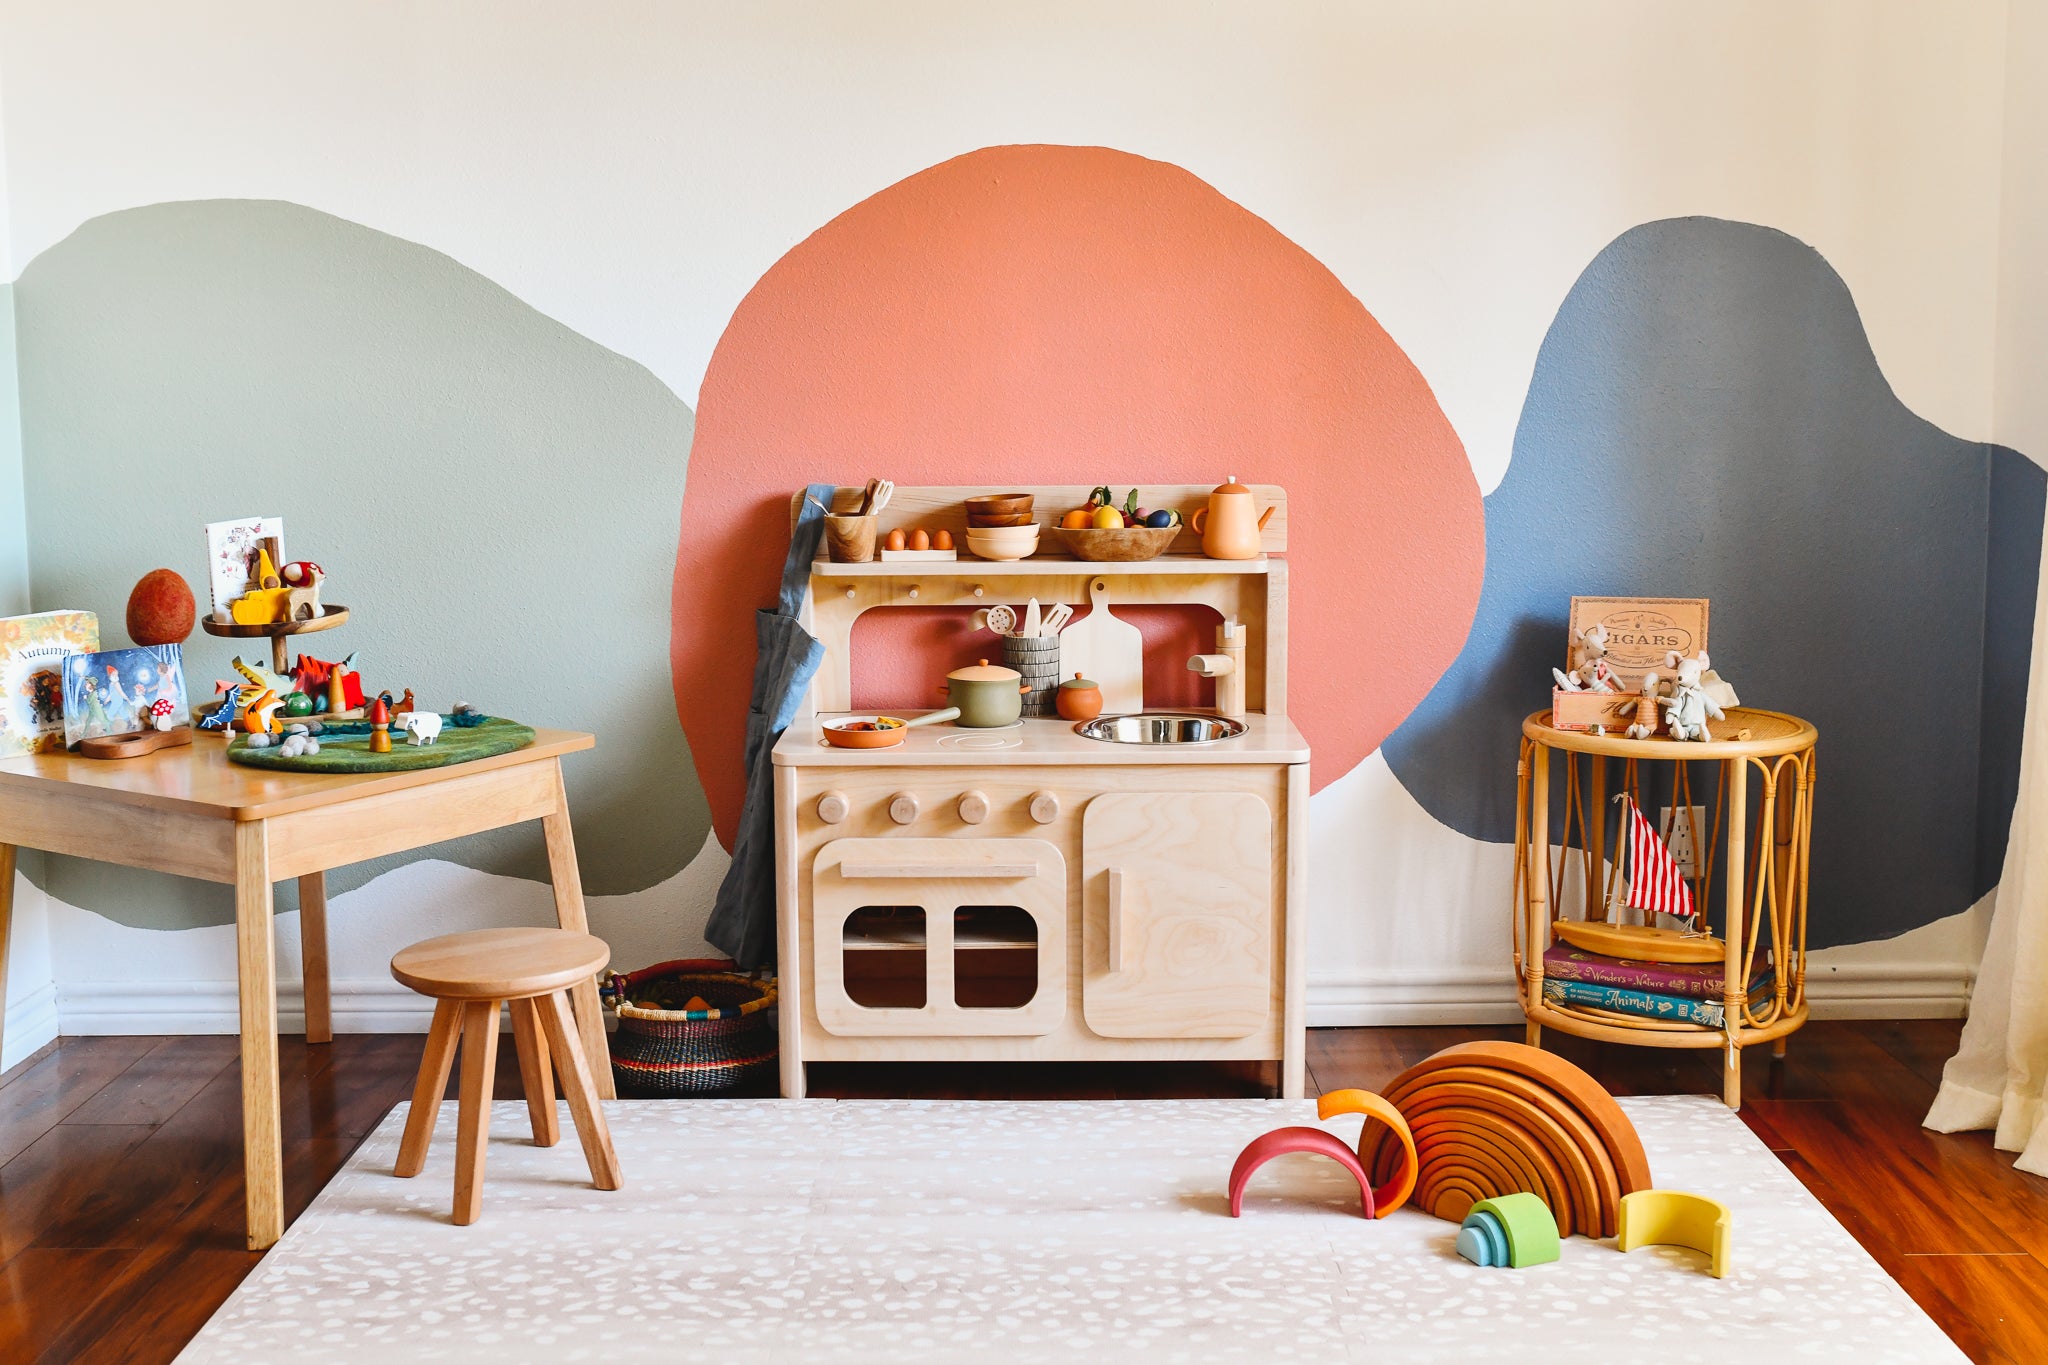 There is a play kitchen in a colorful child's playroom.